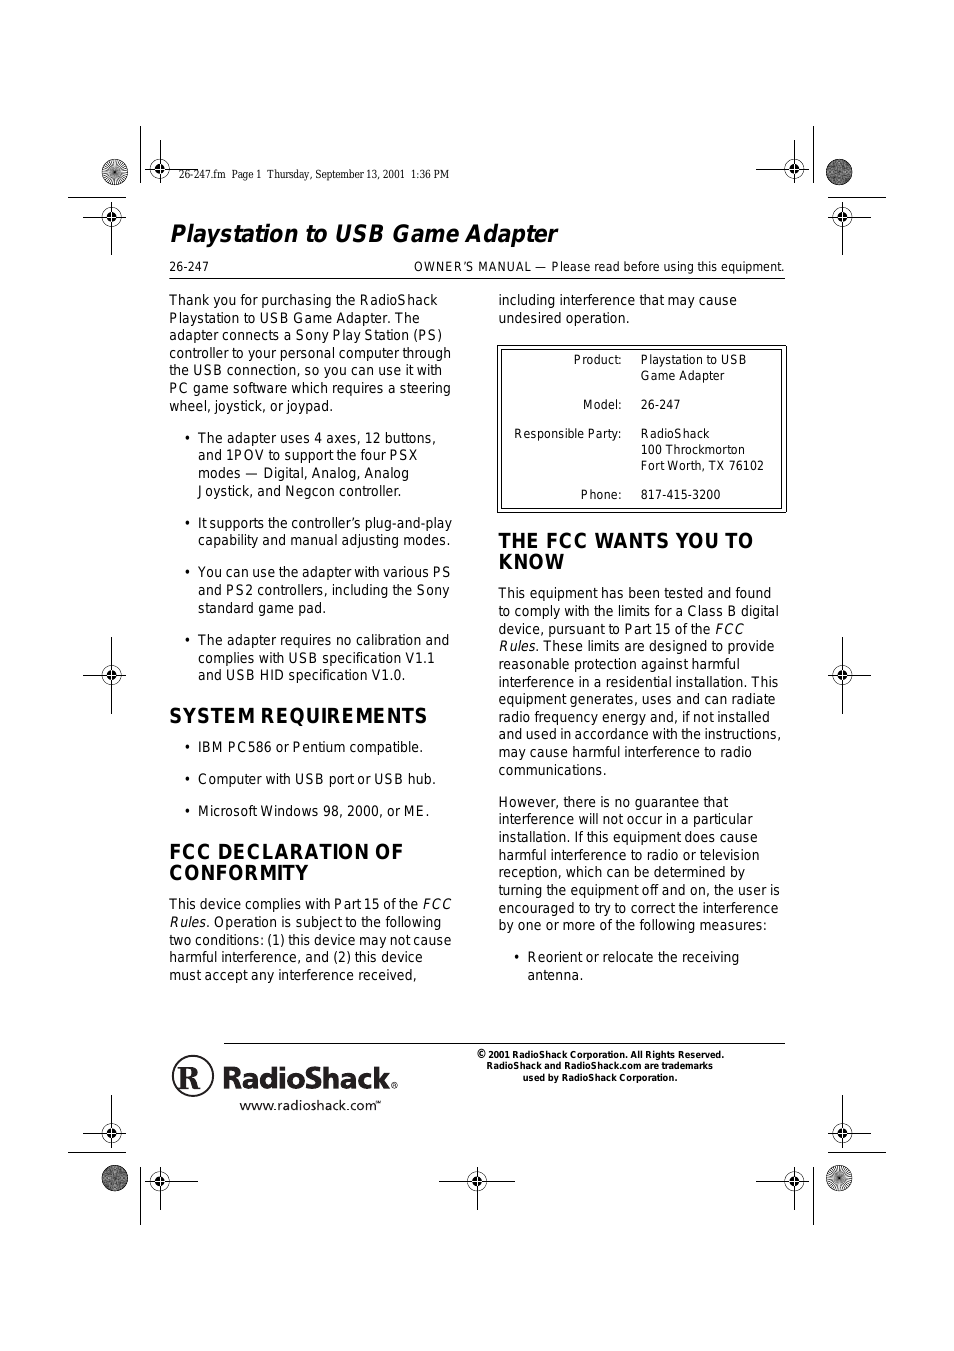 PLAYSTATION TO USB GAME ADAPTER 26-247